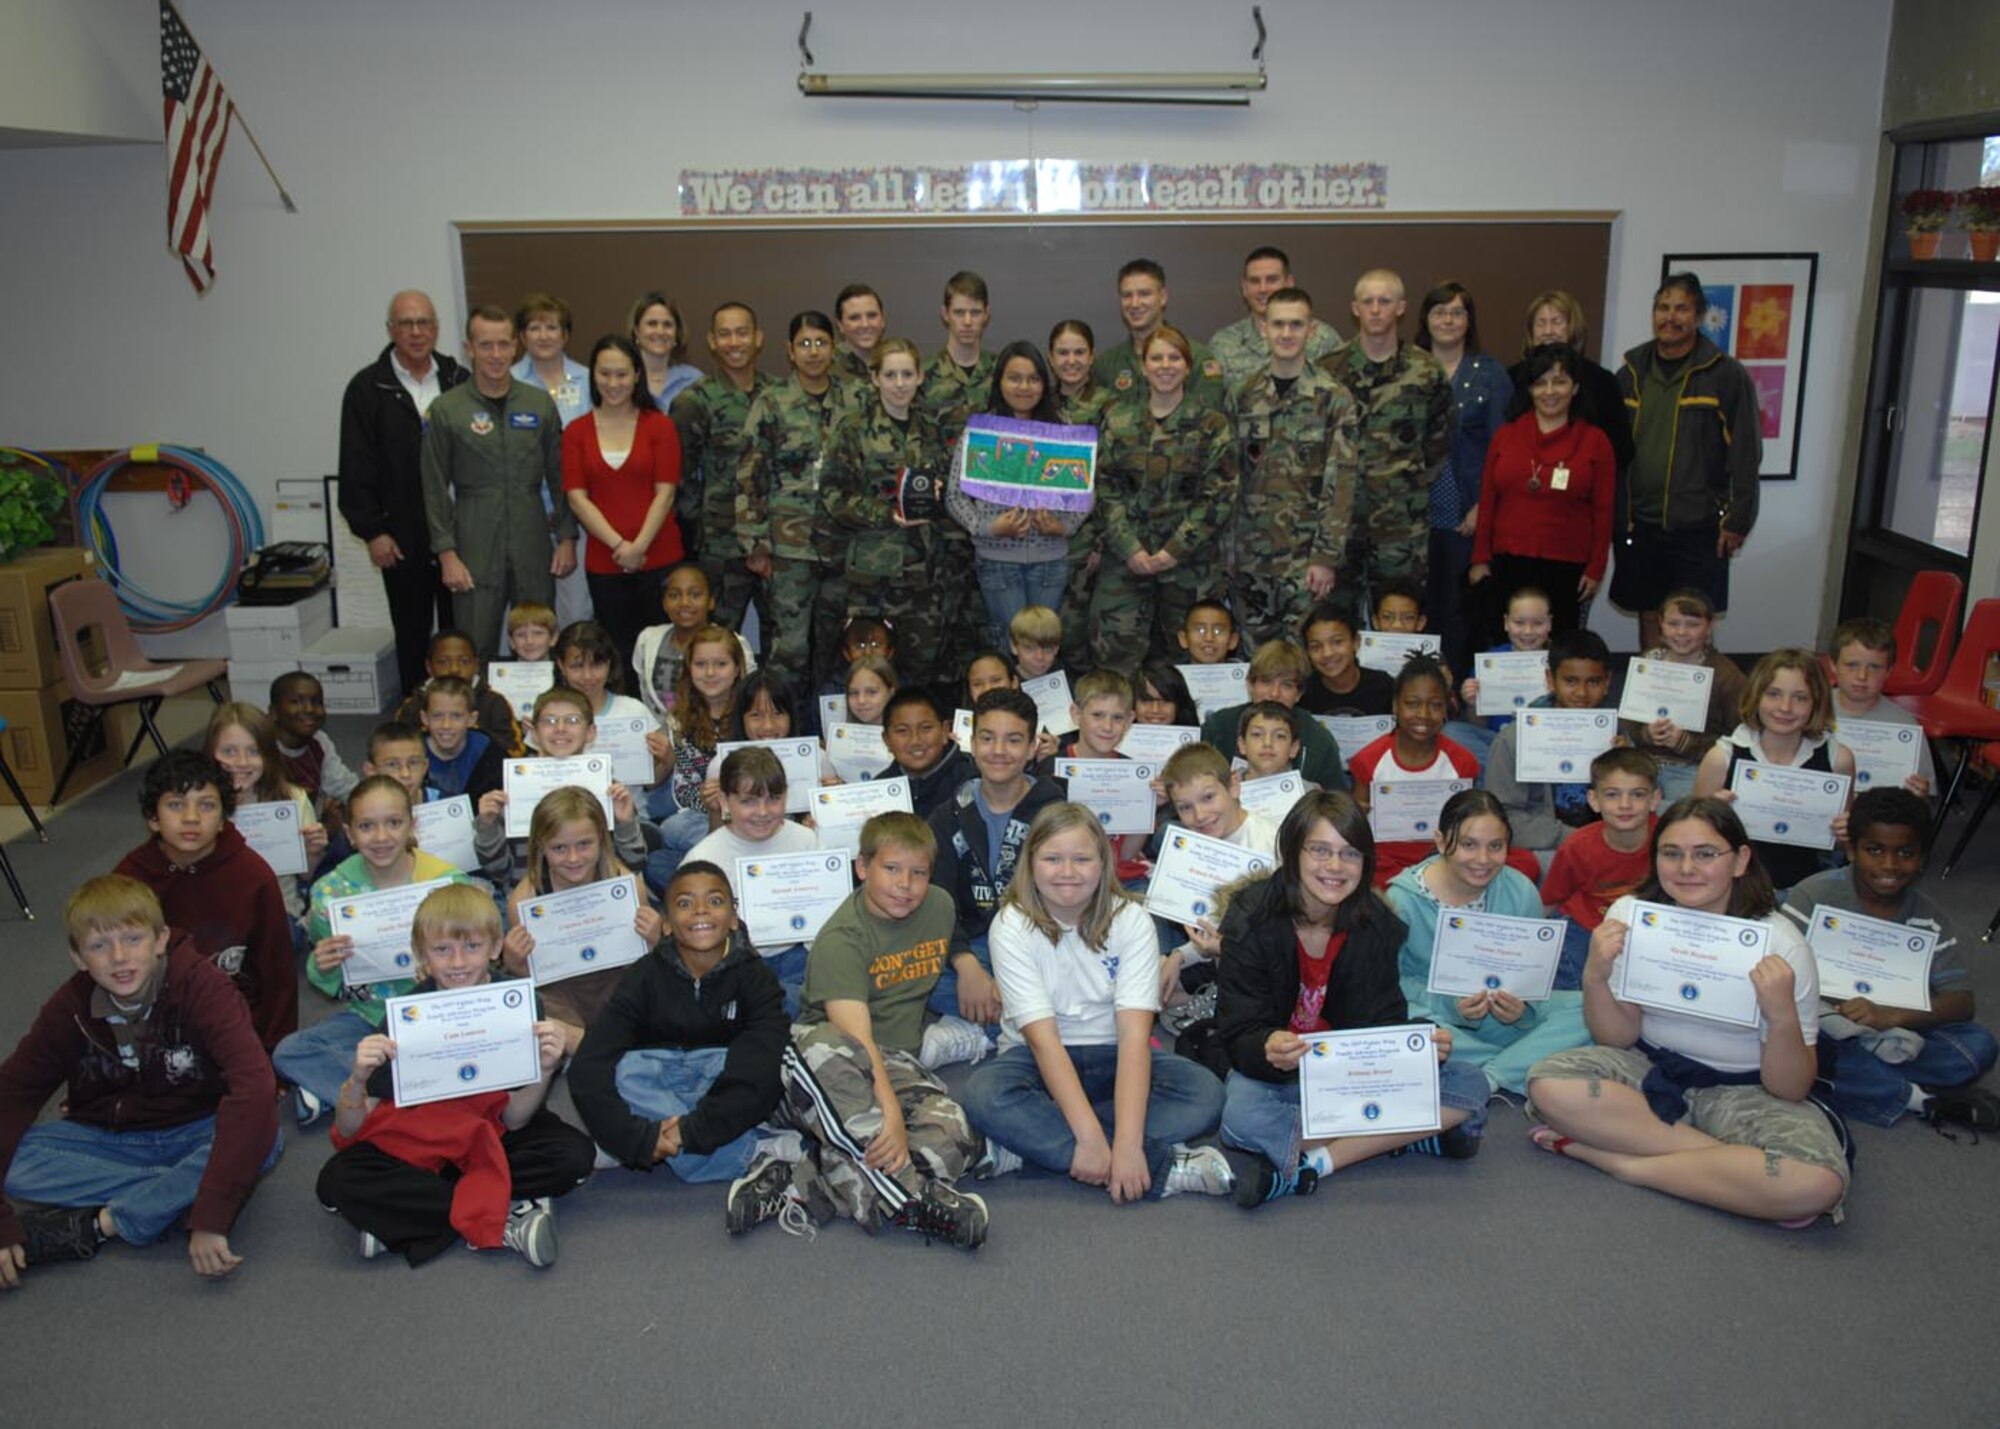 Celeste Vasquez, the winner of the Child Abuse prevention poster contest, poses for a photo with all of the fifth graders at Borman elementary school, the Airmen that helped judge the contest, and Col. Kent Laughbaum, 355th Fighter Wing commander. 